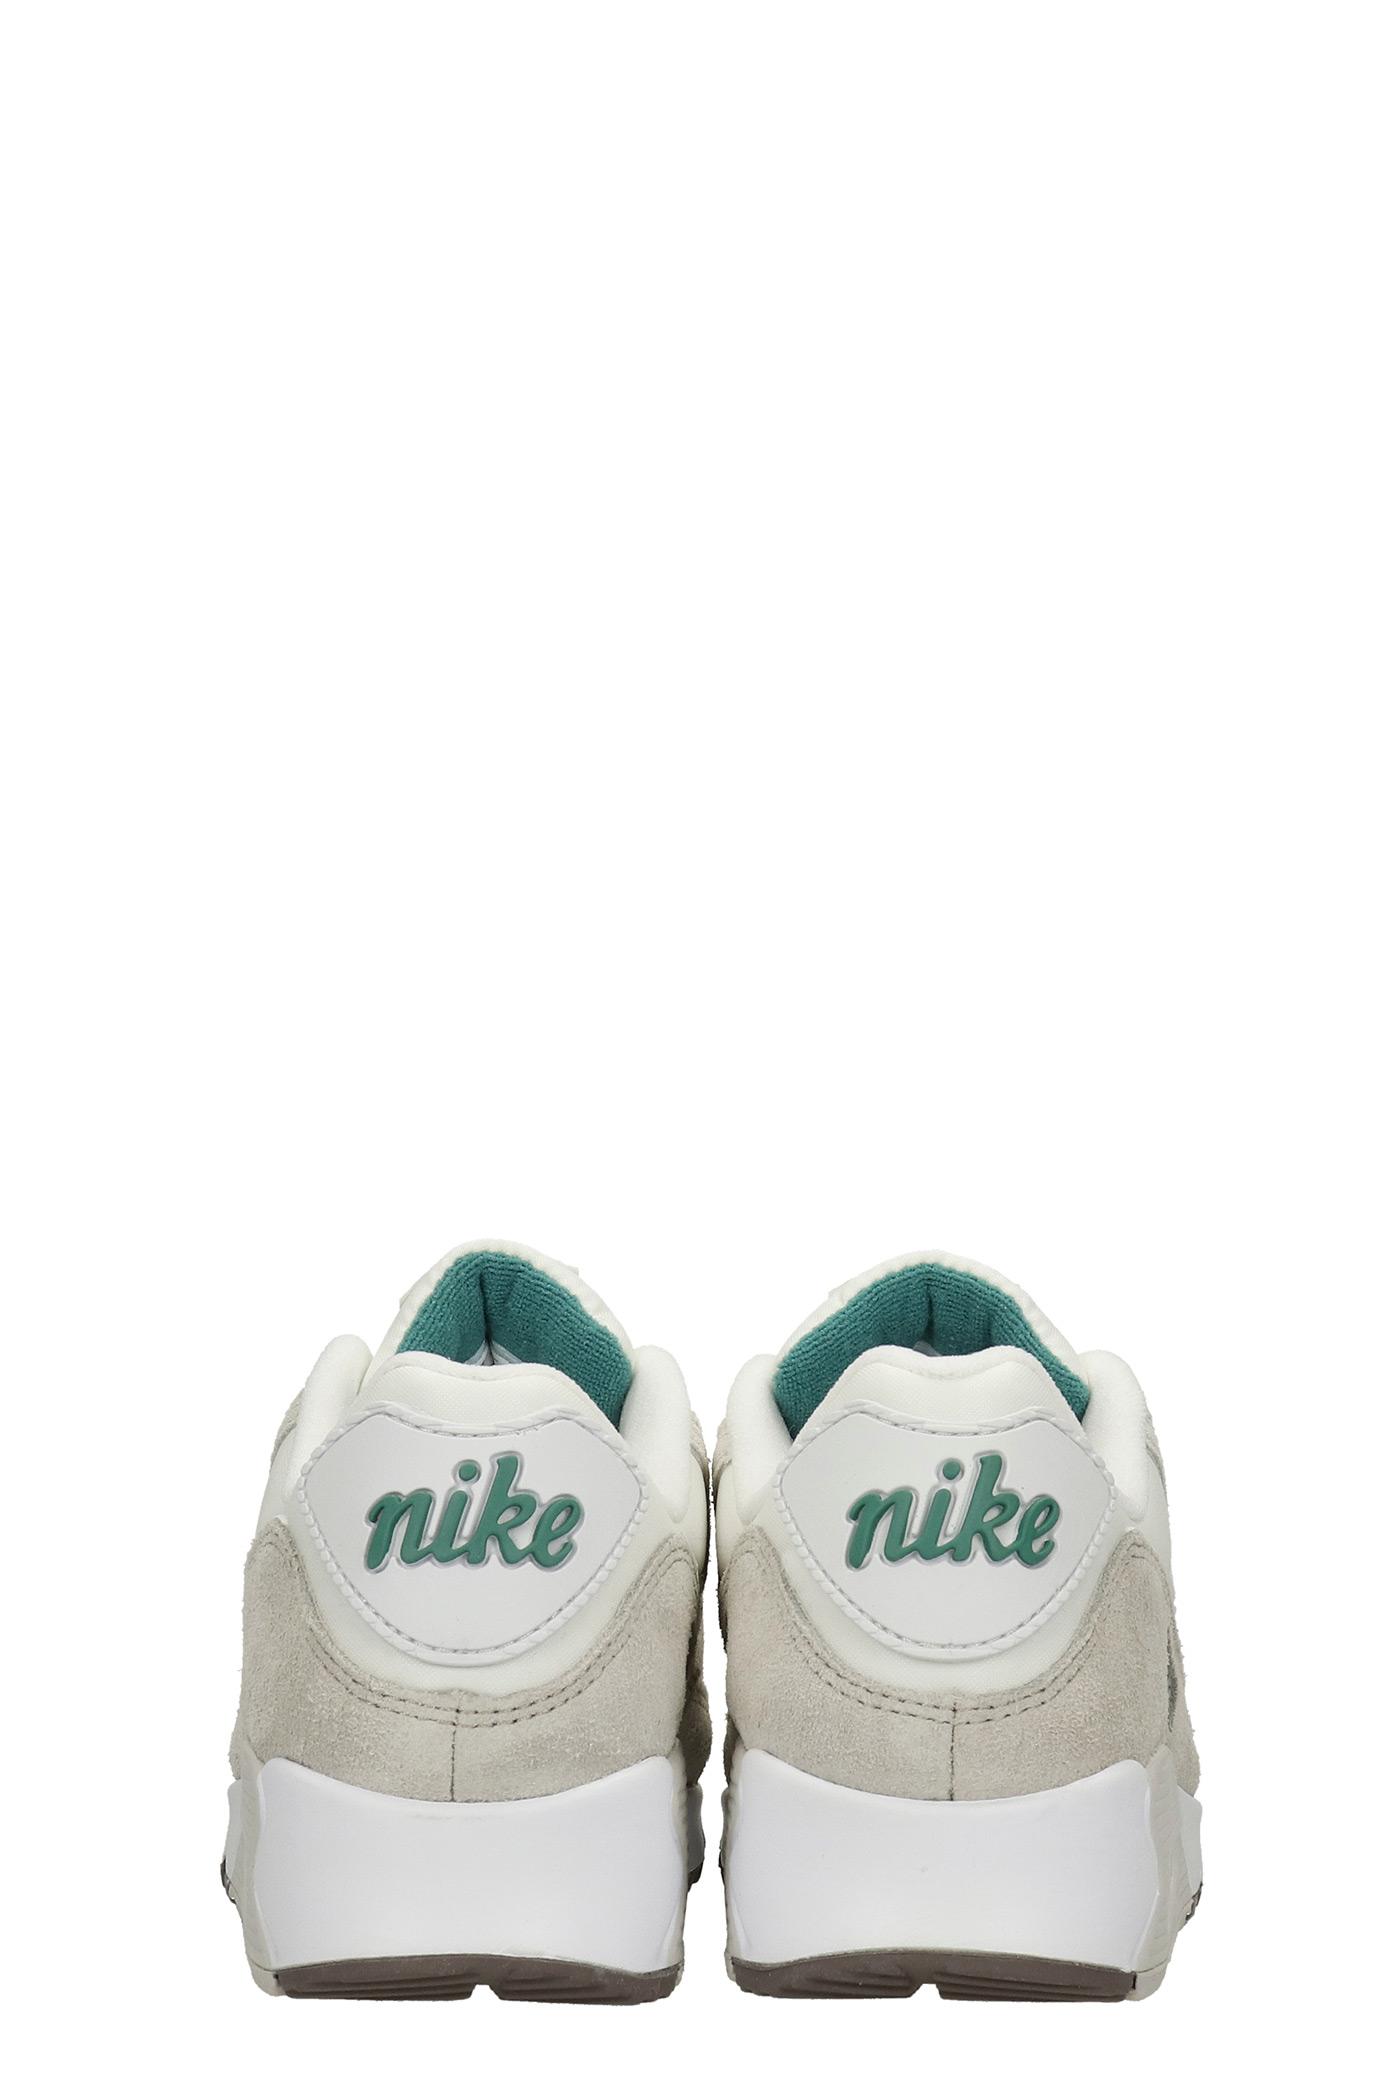 Nike Air Max 90 Se Sneakers In White Suede And Leather for Men | Lyst